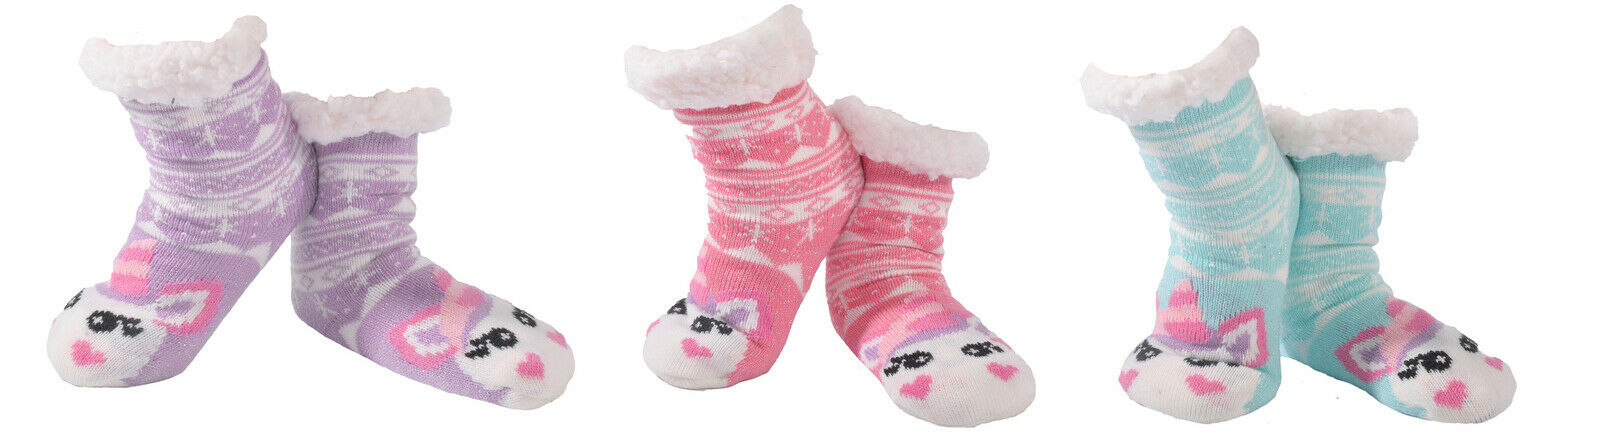 Nuzzles - Sparkle Unicorn (Pink) - Girls (Approx Age 3-7)